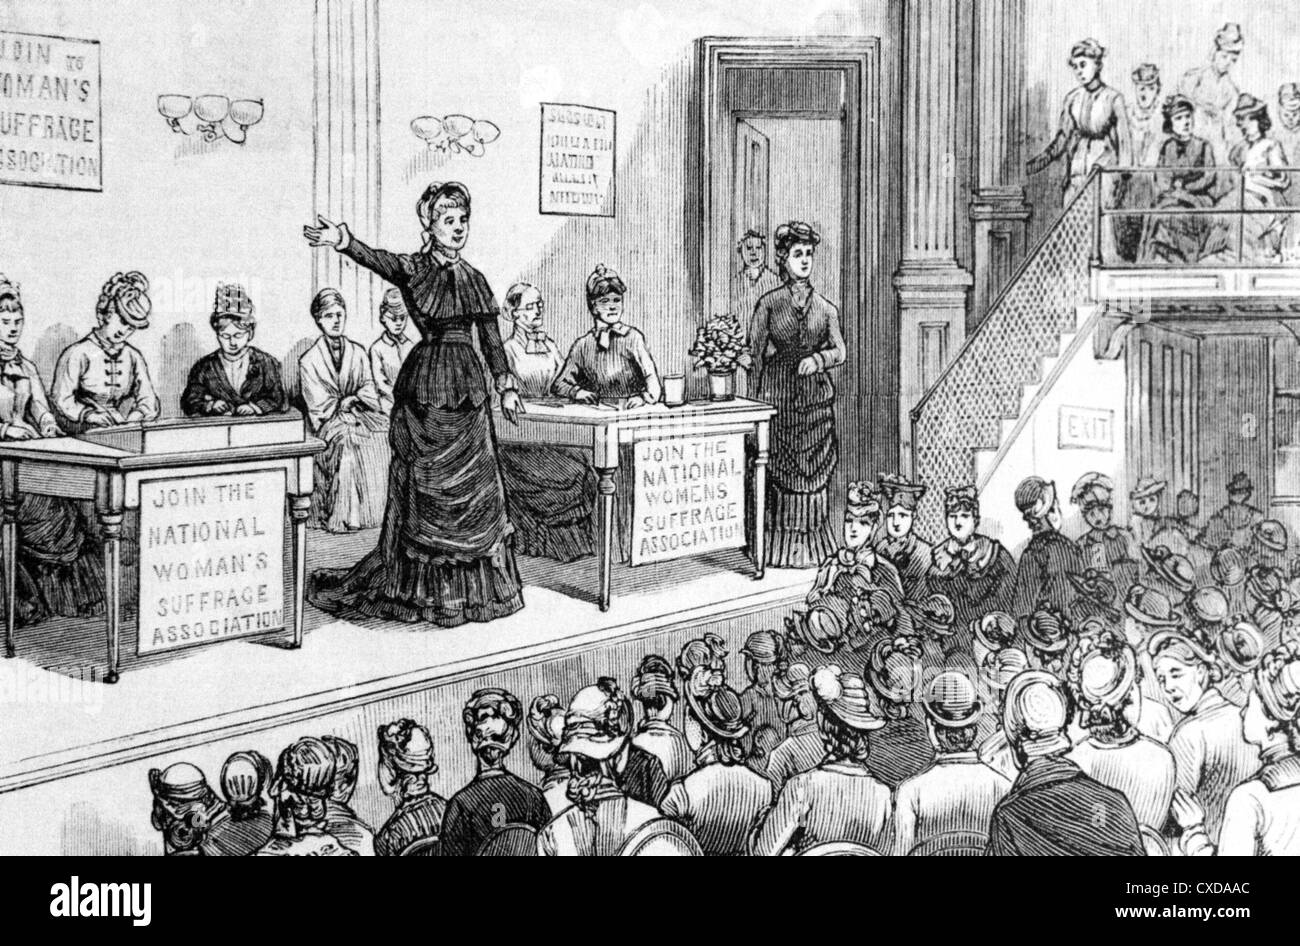 NATIONAL WOMENS' SUFFRAGE ASSOCIATION  at a political convention in Chicago in 1880  with Susan B. Anthony speaking Stock Photo